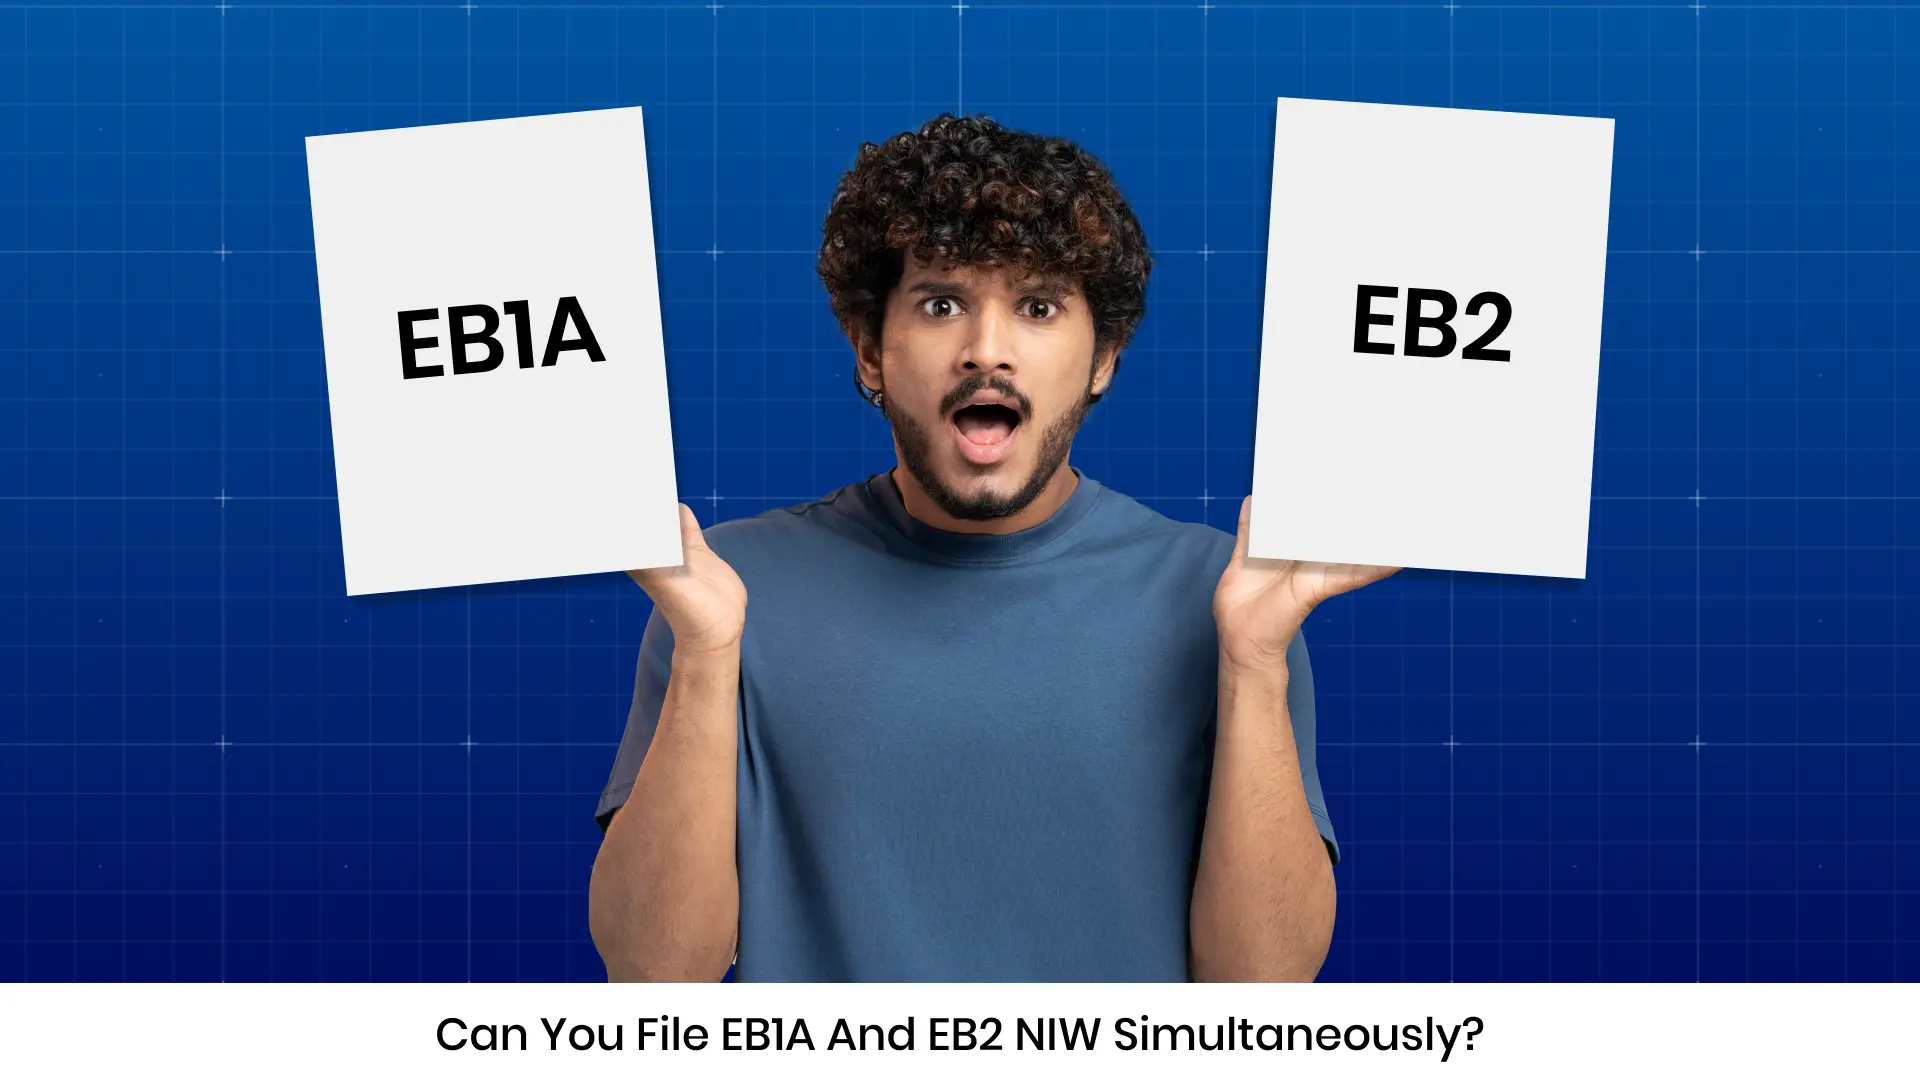 Can You File EB1A and EB2-NIW Simultaneously?